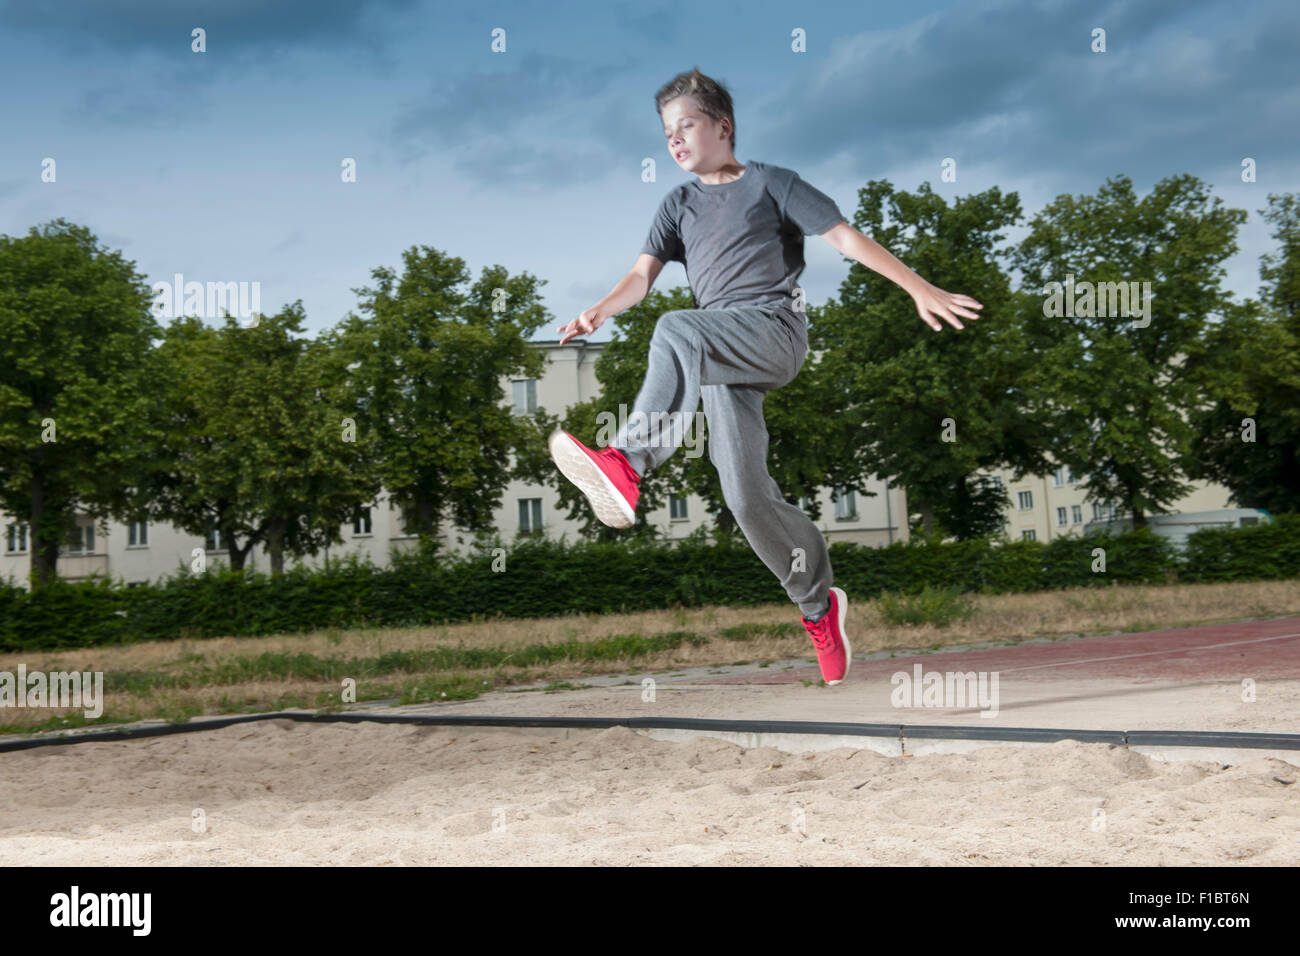 frozen side frontal full body view of a male young teenagers jumping into a long jump pit Stock Photo